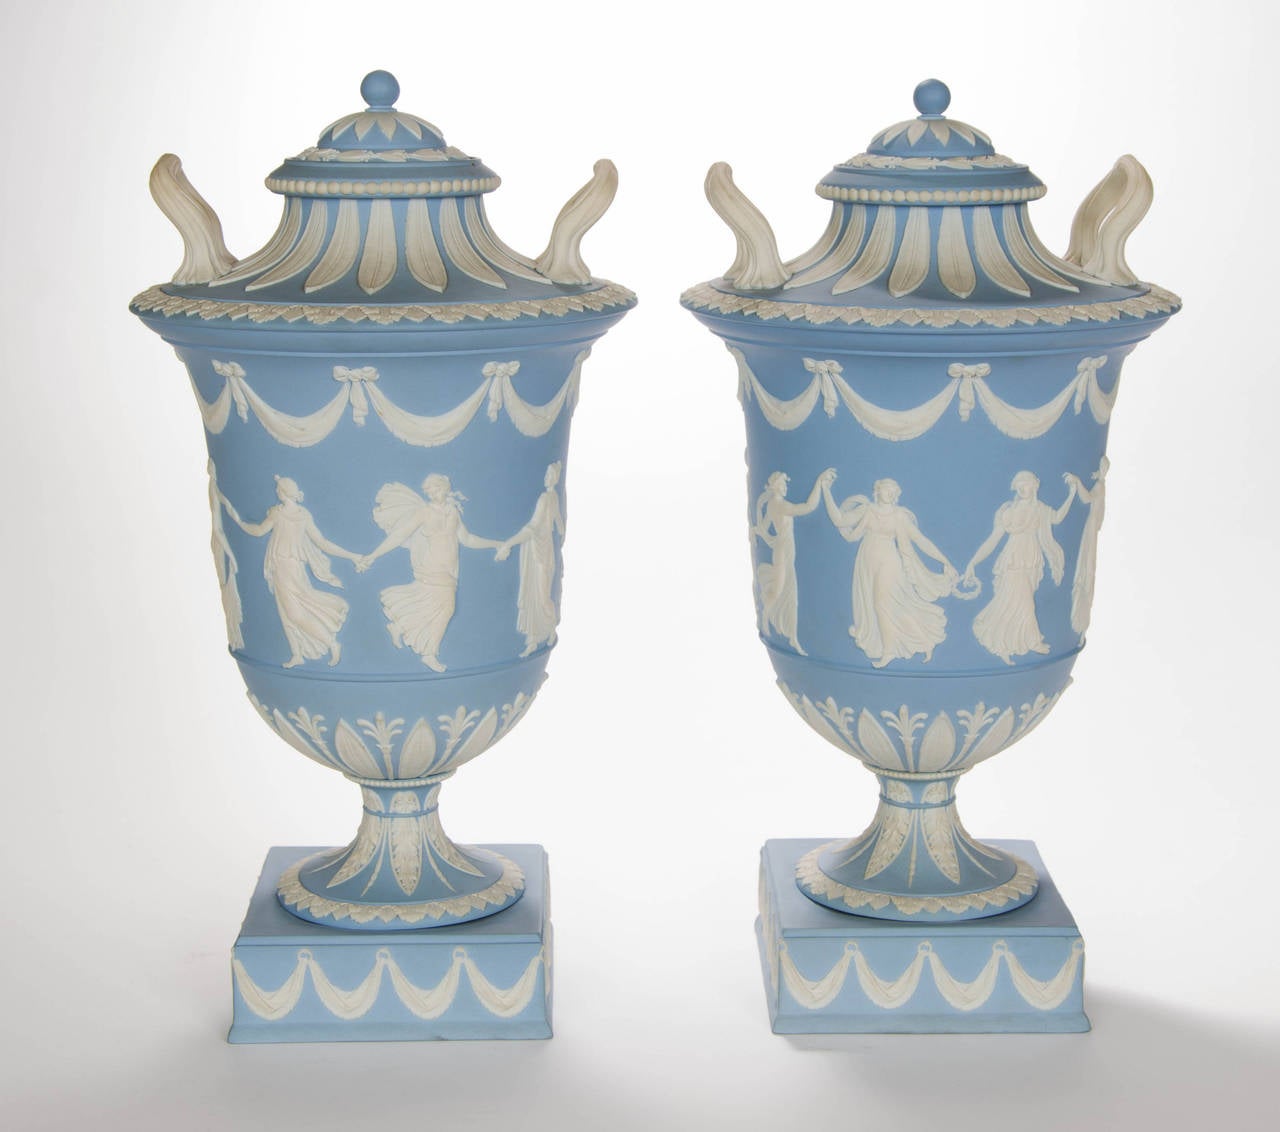 A splendid Pair of Wedgwood jasper ware Vases decorated with classical figures, Dancing Hours with swags above on pedestal base